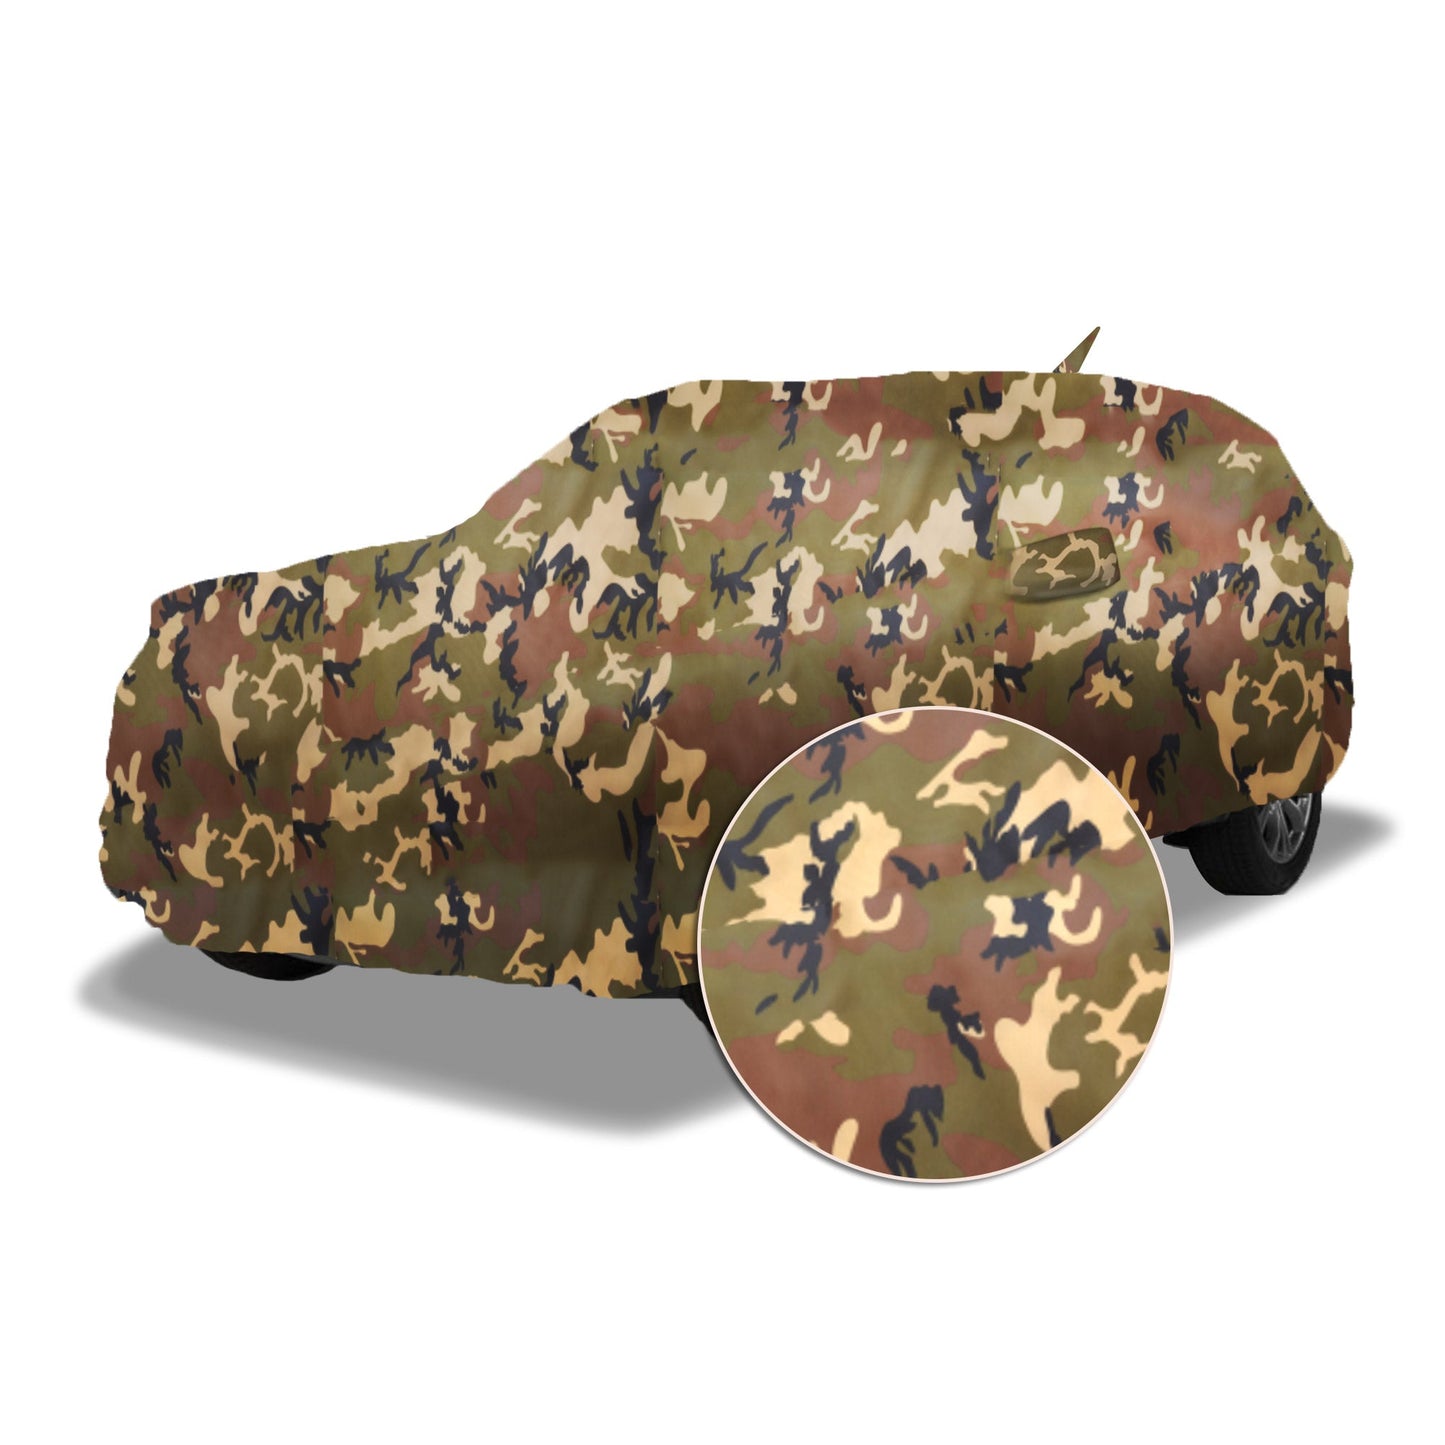 Ascot Maruti Suzuki S-Presso Car Body Cover Extra Strong & Dust Proof Jungle Military Car Cover with UV Proof & Water-Resistant Coating